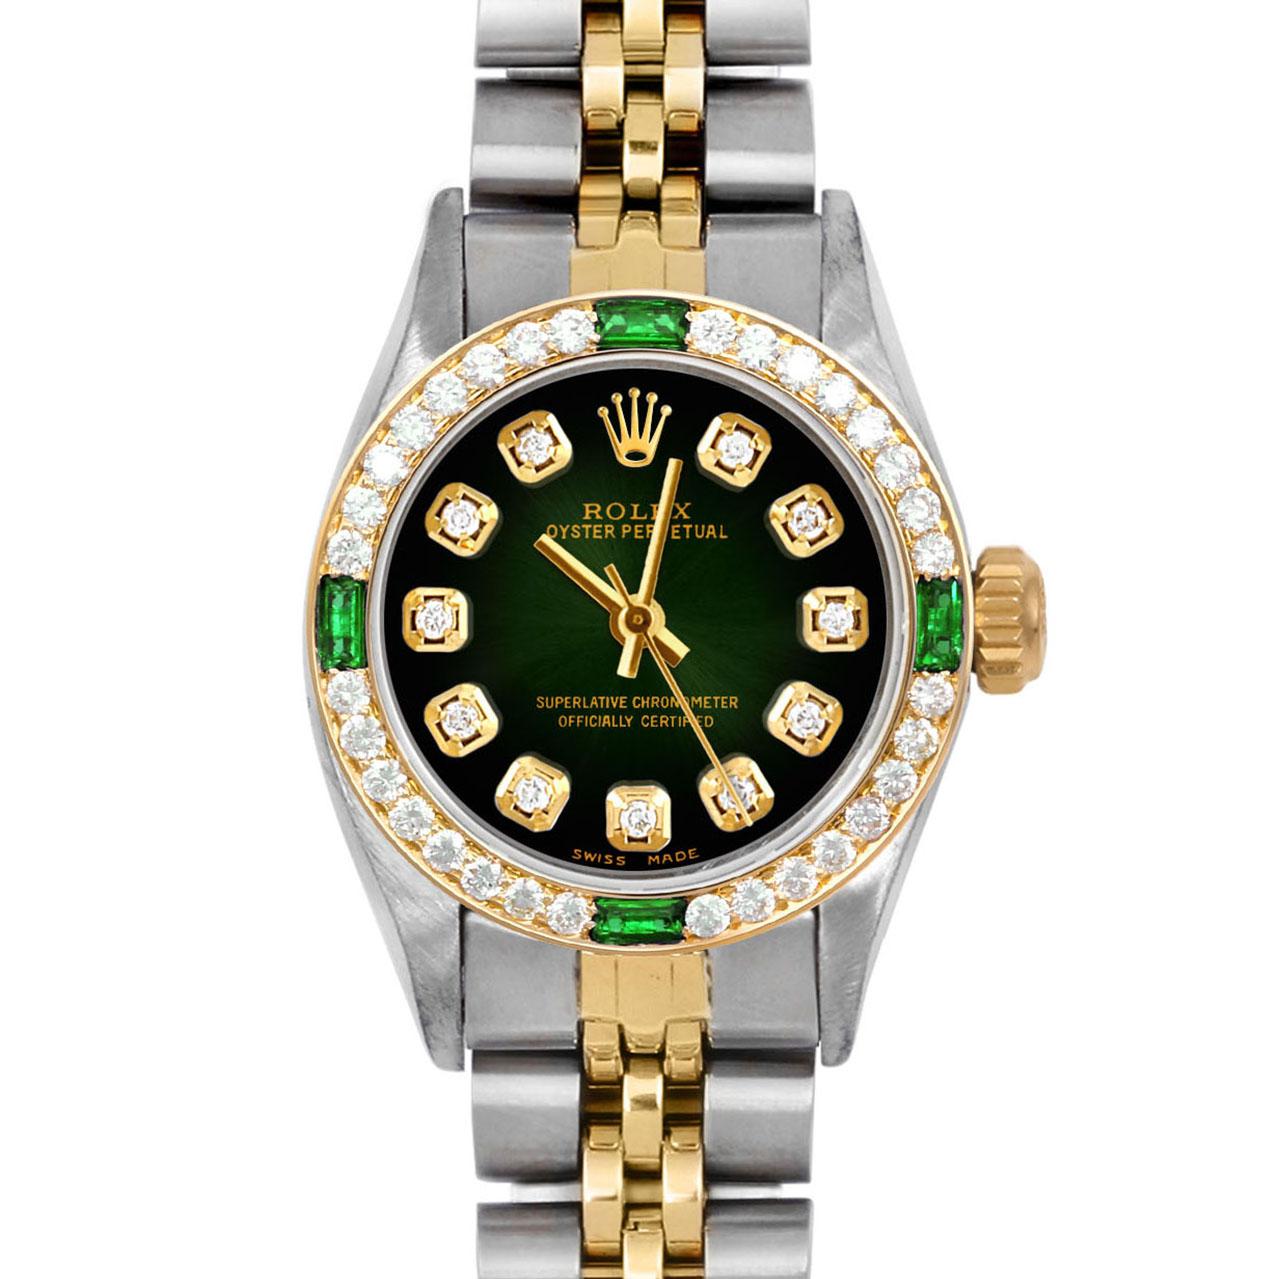 Brand : Rolex
Model : Oyster Perpetual 
Gender : Ladies
Metals : 14K Yellow Gold / Stainless Steel
Case Size : 24 mm
Dial : Custom Green Vignette Diamond Dial (This dial is not original Rolex And has been added aftermarket yet is a beautiful Custom